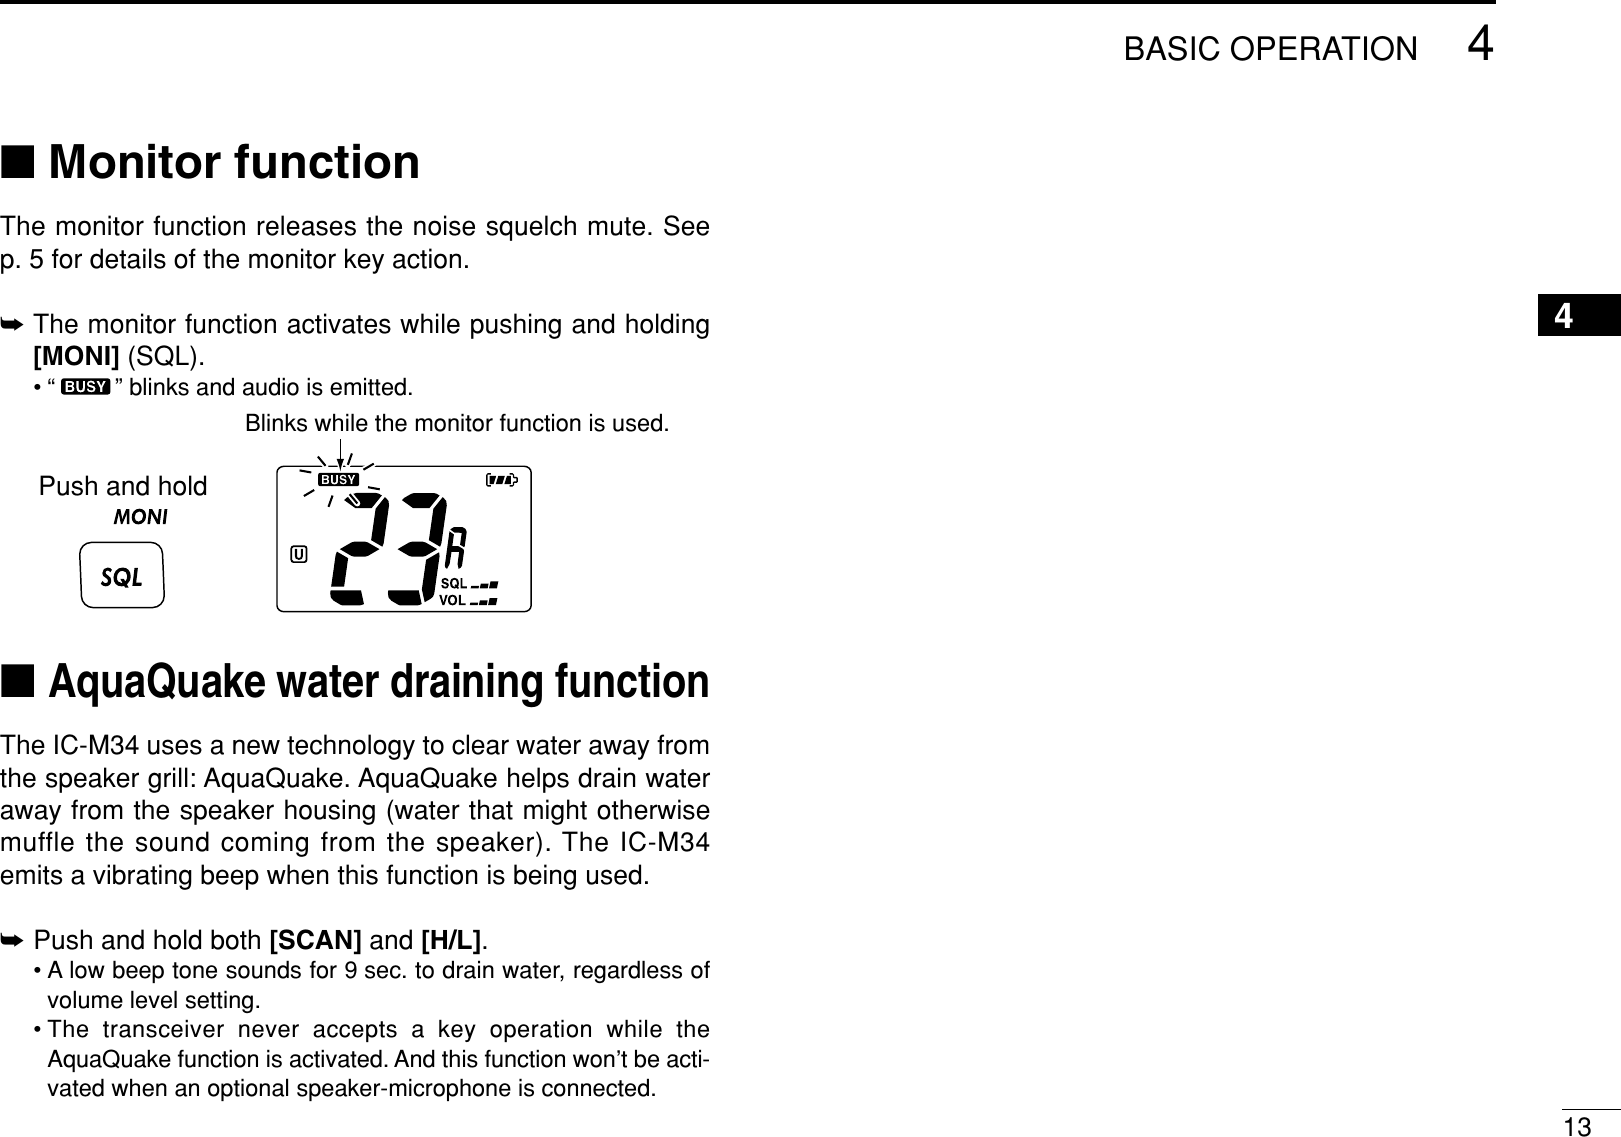 134BASIC OPERATION4■Monitor functionThe monitor function releases the noise squelch mute. Seep. 5 for details of the monitor key action.➥The monitor function activates while pushing and holding[MONI] (SQL).• “ ” blinks and audio is emitted.■AquaQuake water draining functionThe IC-M34 uses a new technology to clear water away fromthe speaker grill: AquaQuake. AquaQuake helps drain wateraway from the speaker housing (water that might otherwisemuffle the sound coming from the speaker). The IC-M34emits a vibrating beep when this function is being used.➥Push and hold both [SCAN] and [H/L].• A low beep tone sounds for 9 sec. to drain water, regardless ofvolume level setting.• The transceiver never accepts a key operation while theAquaQuake function is activated. And this function won’t be acti-vated when an optional speaker-microphone is connected.Push and holdBlinks while the monitor function is used.